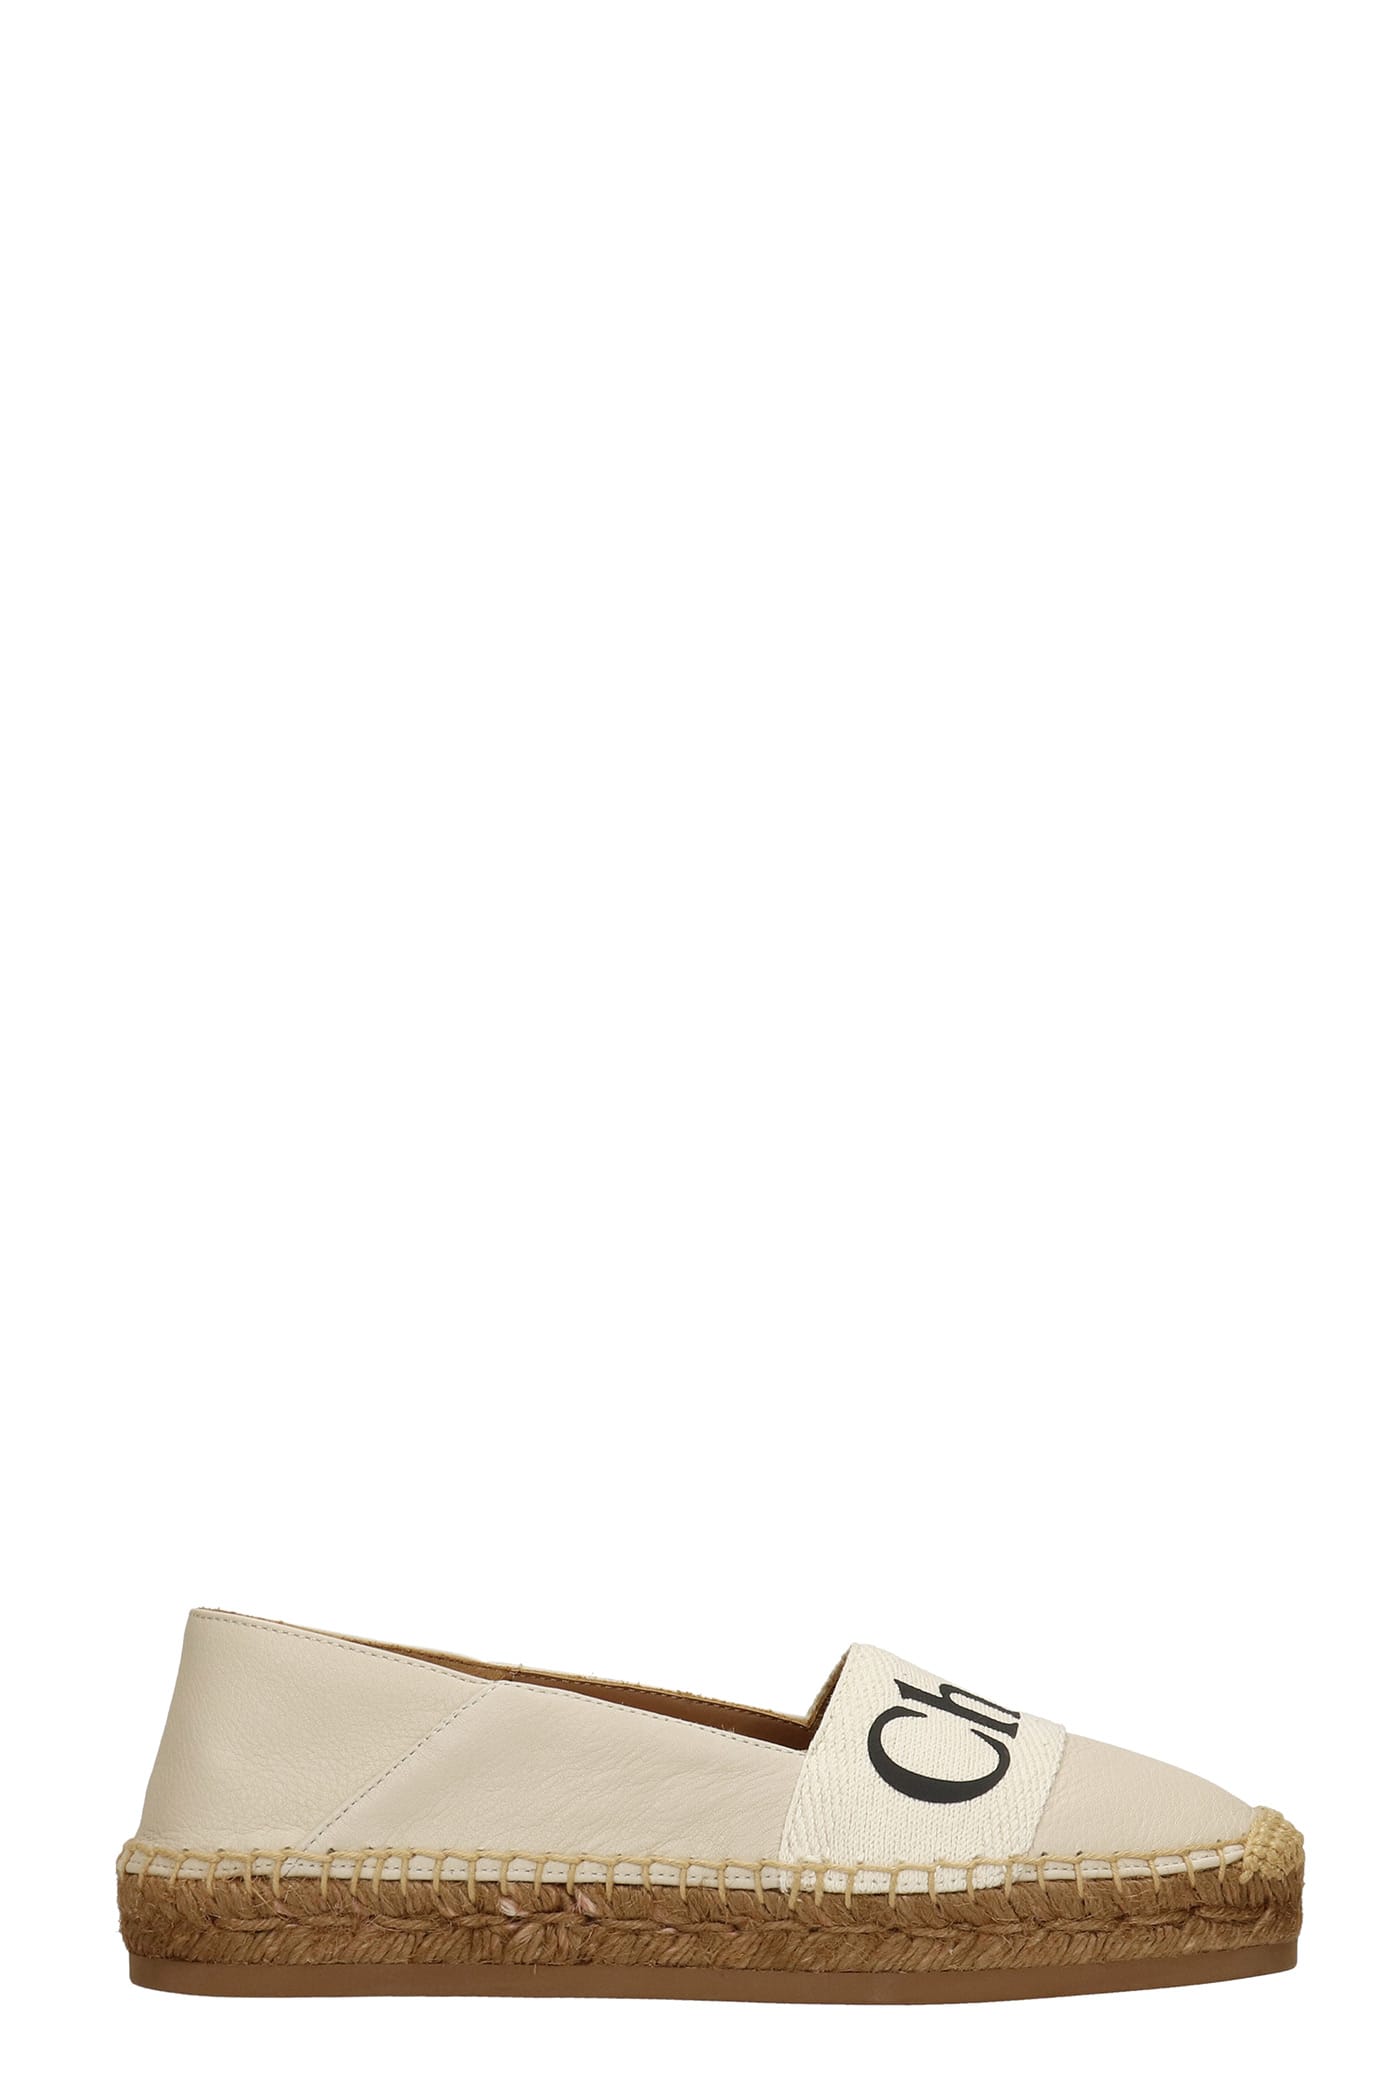 Chloé Espadrilles In White Leather